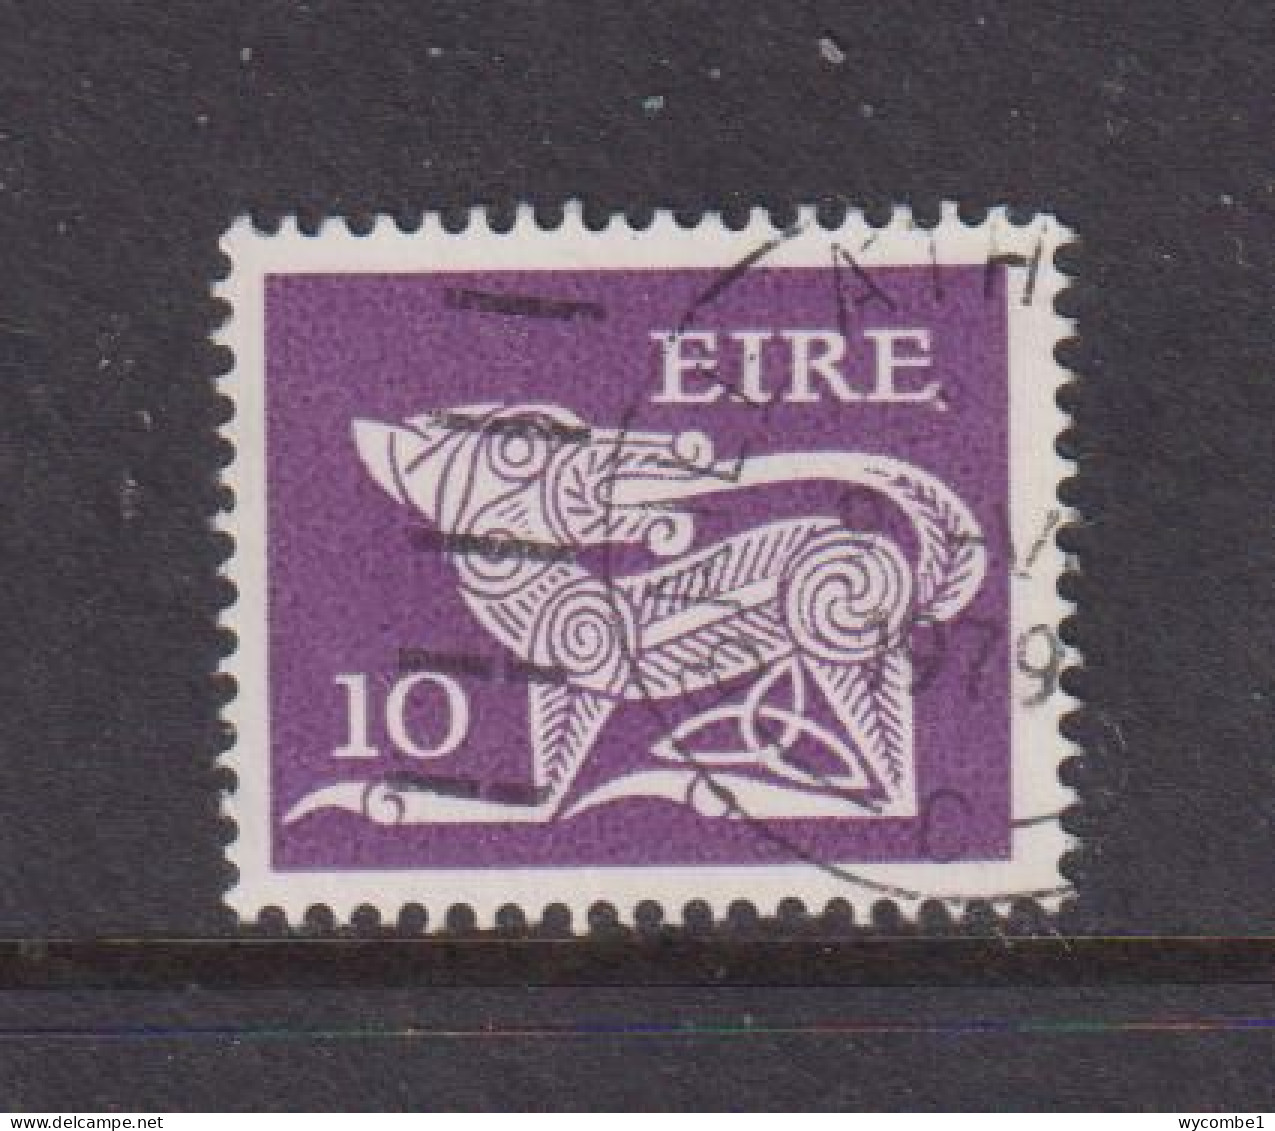 IRELAND - 1971  Decimal Currency Definitives  10p  Used As Scan - Gebraucht